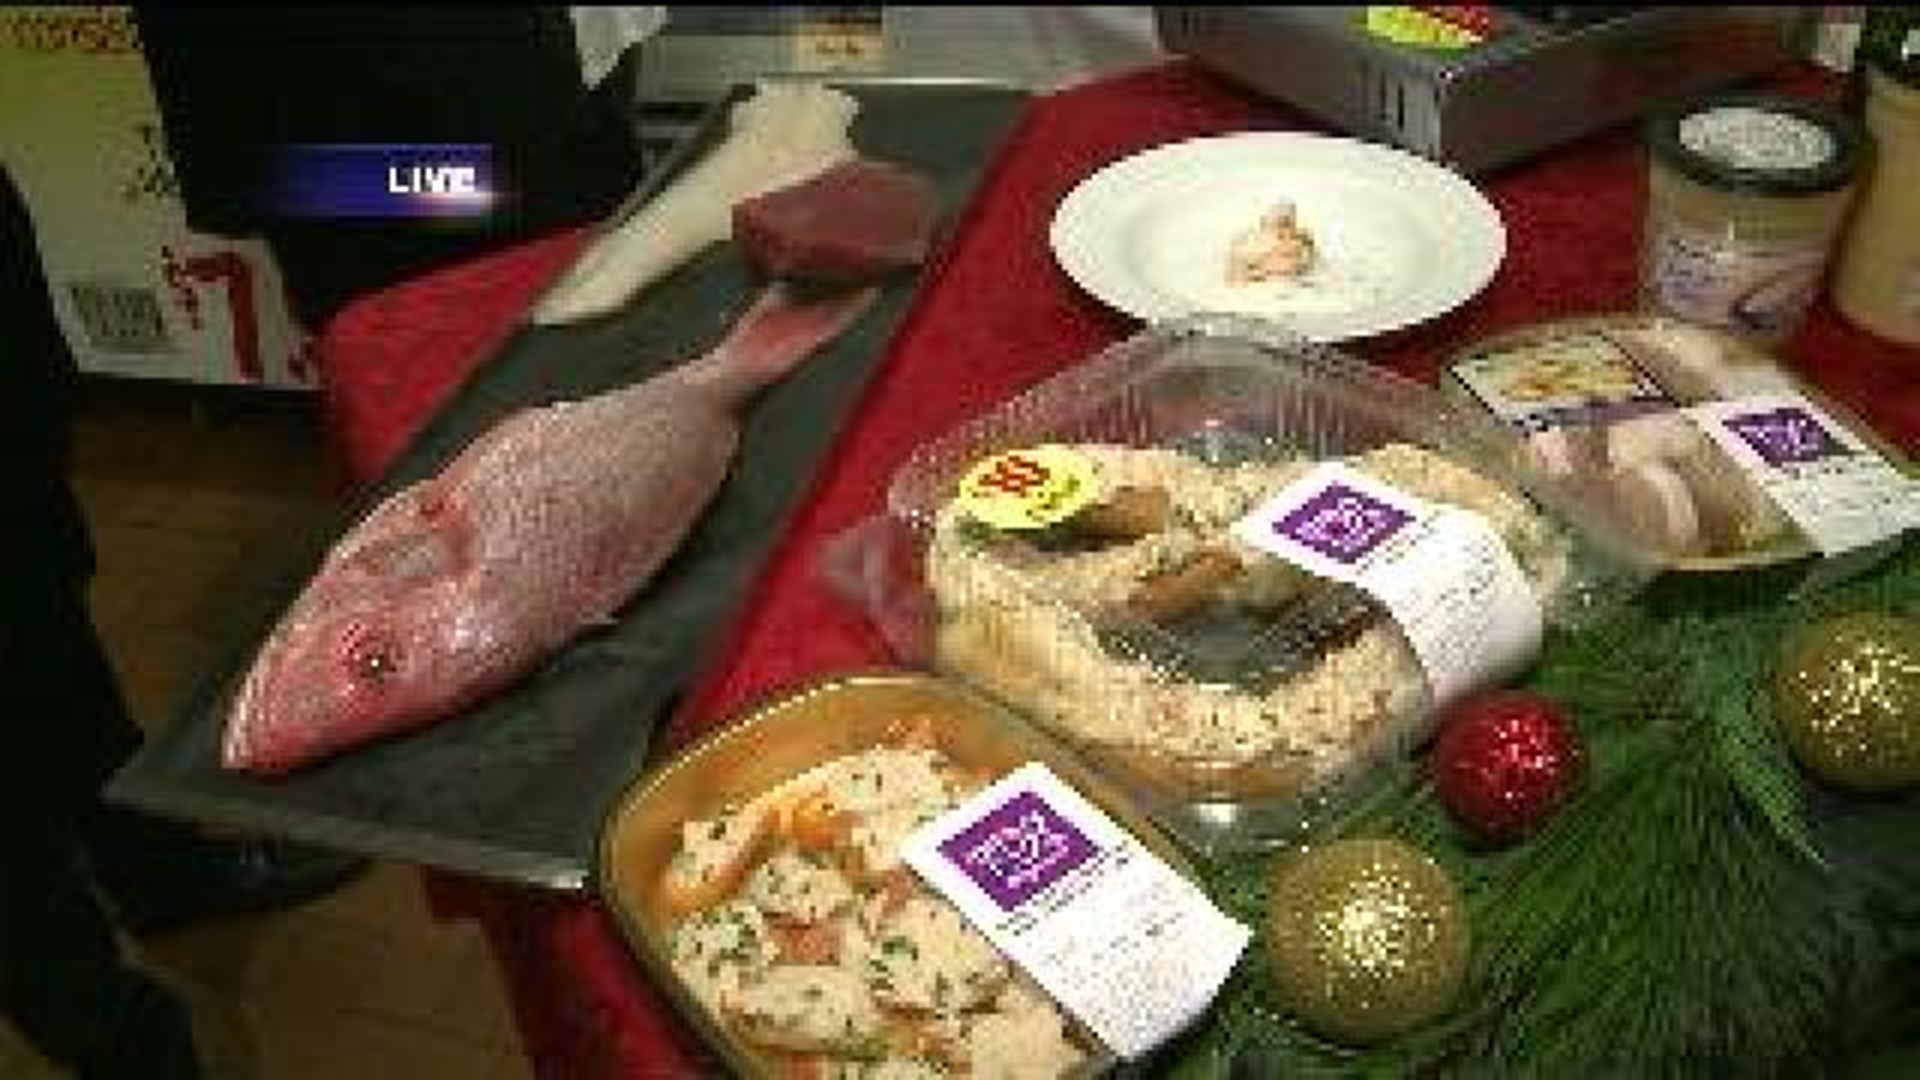 Free Holiday Meals on Christmas Day